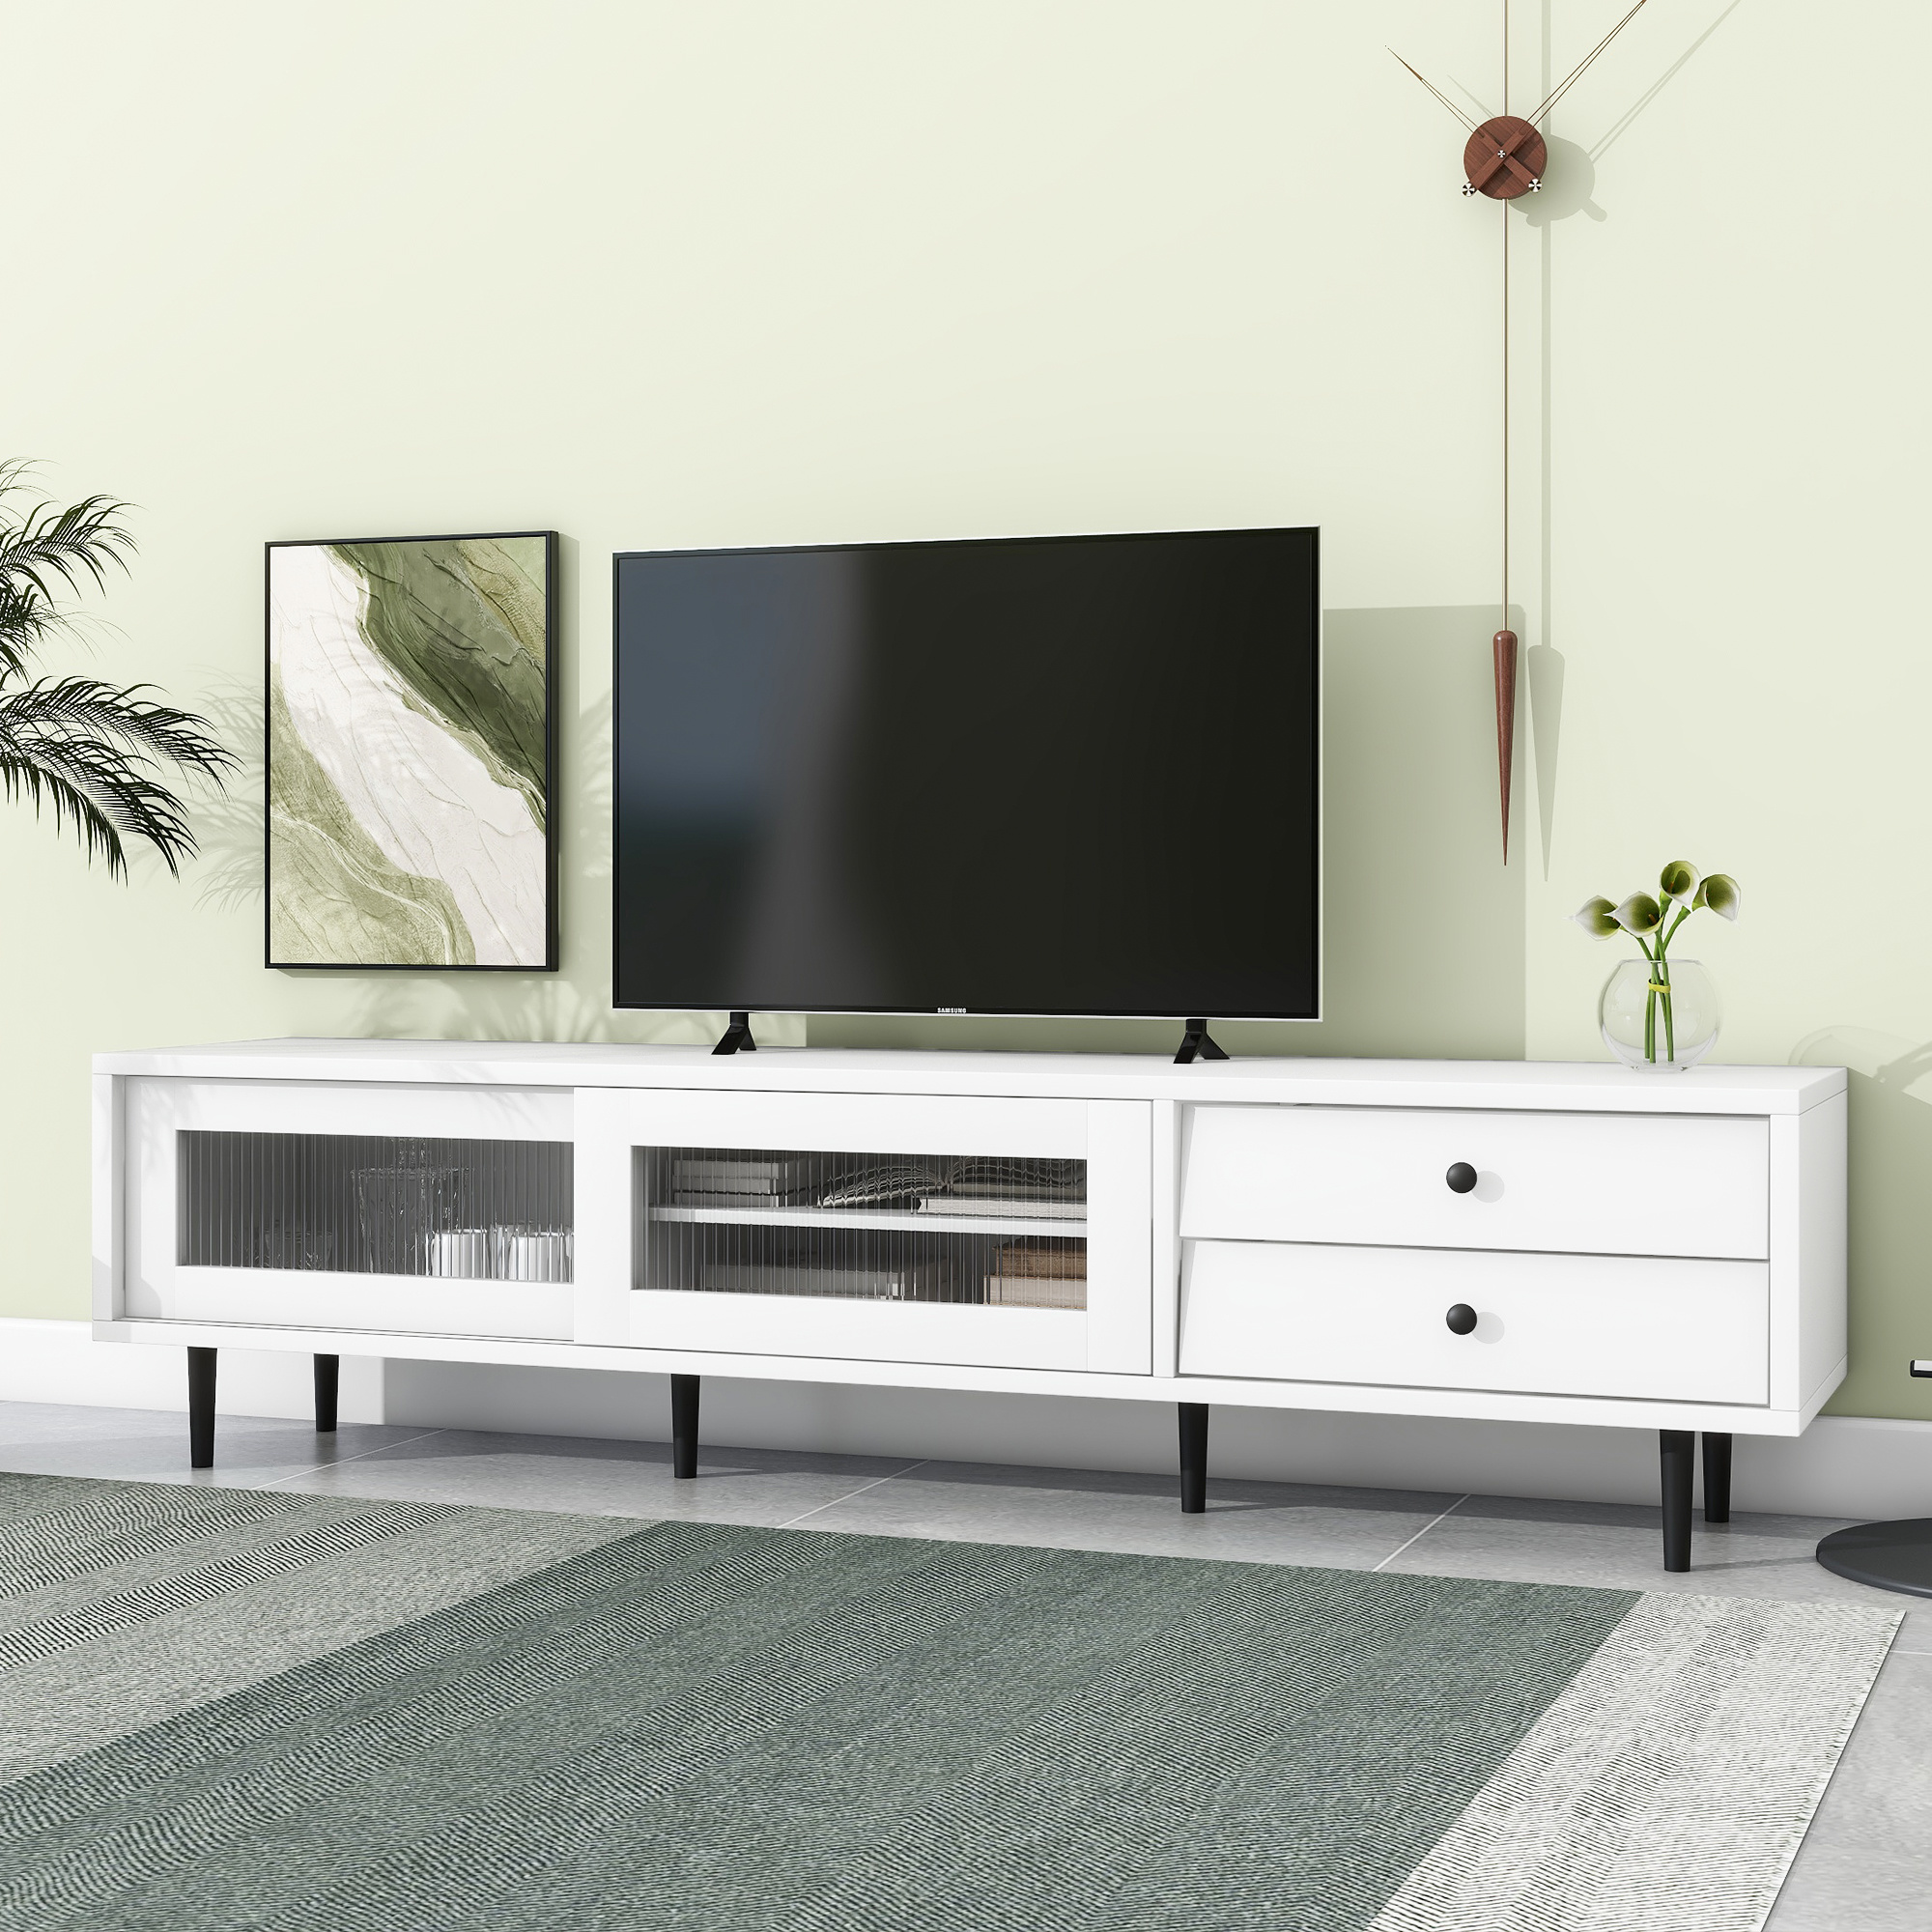 ON-TREND Chic Elegant Design TV Stand with Sliding Fluted Glass Doors, Slanted Drawers Media Console